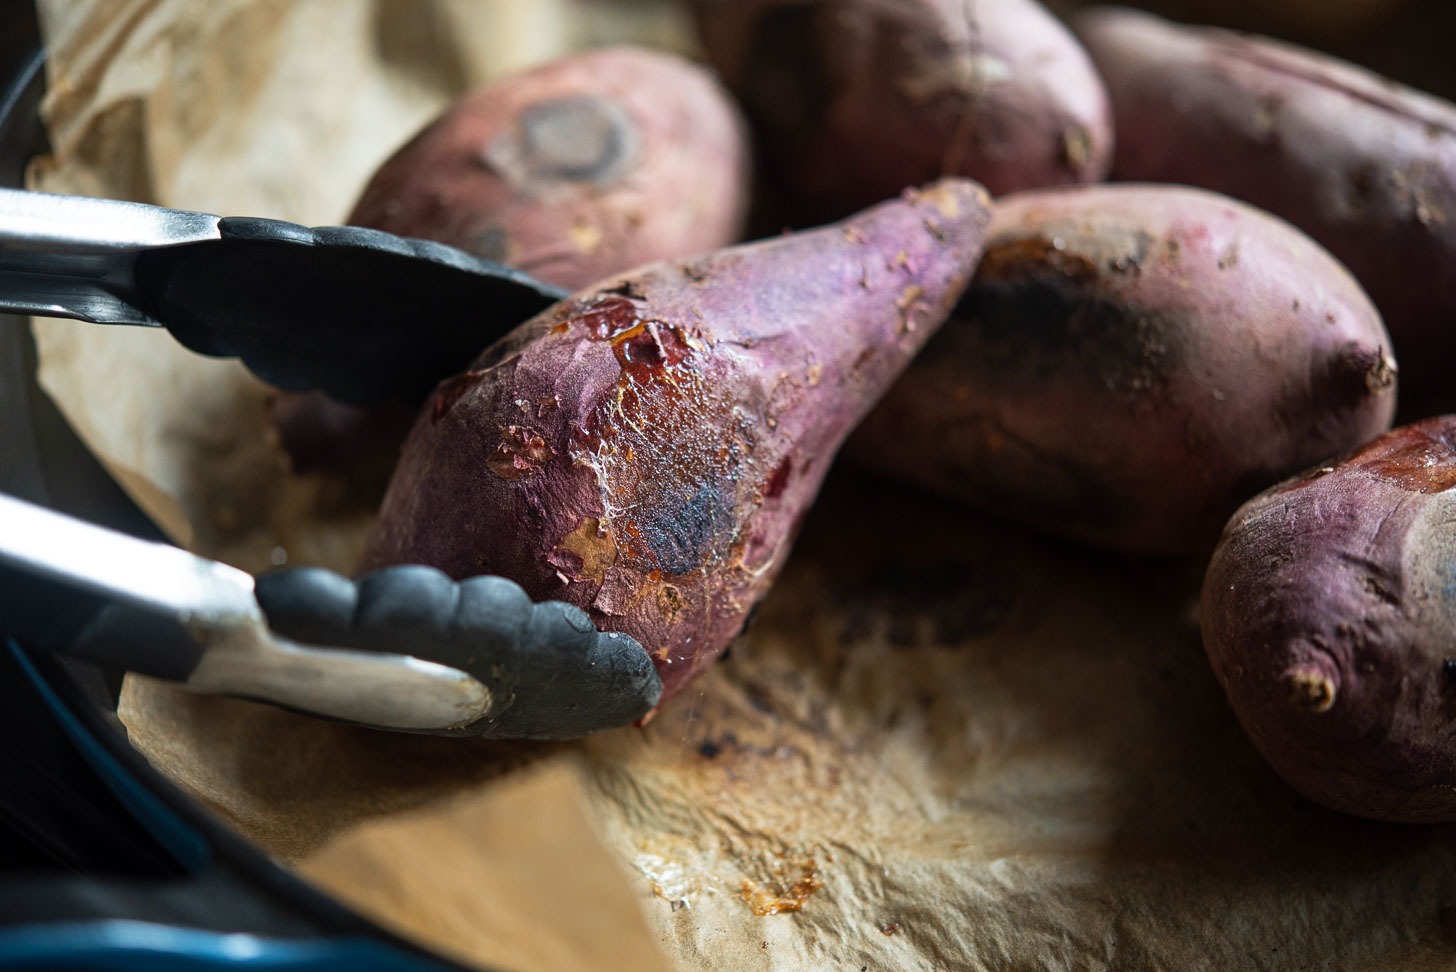 Turn pan roasted Korean sweet potato to the other side using a kitchen tongs